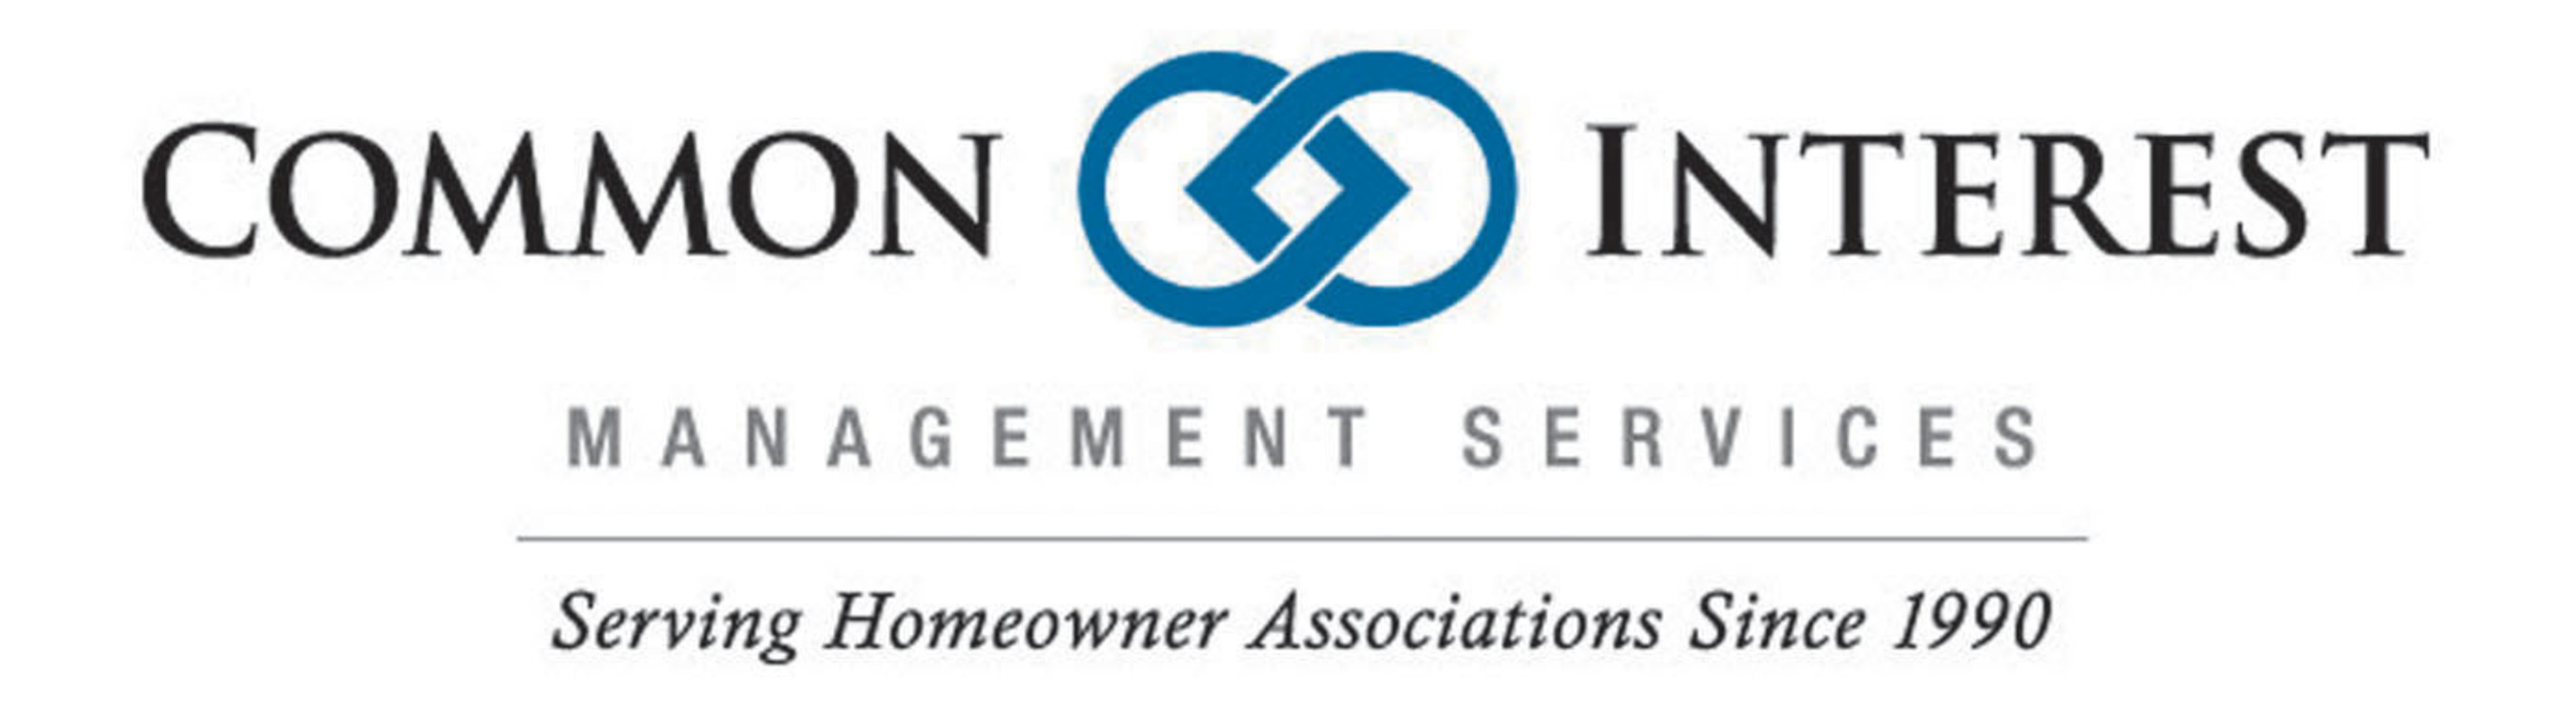 Founded in 1990, Common Interest Management is a leading provider of professional association management services to homeowners associations (HOAs) throughout the Bay Area with offices in Danville, San Mateo and Campbell. Common Interest Management specializes in the management of master-planned, single family home, condominium, mixed use residential and mid-rise communities and now serves more than 240 communities in Northern California.